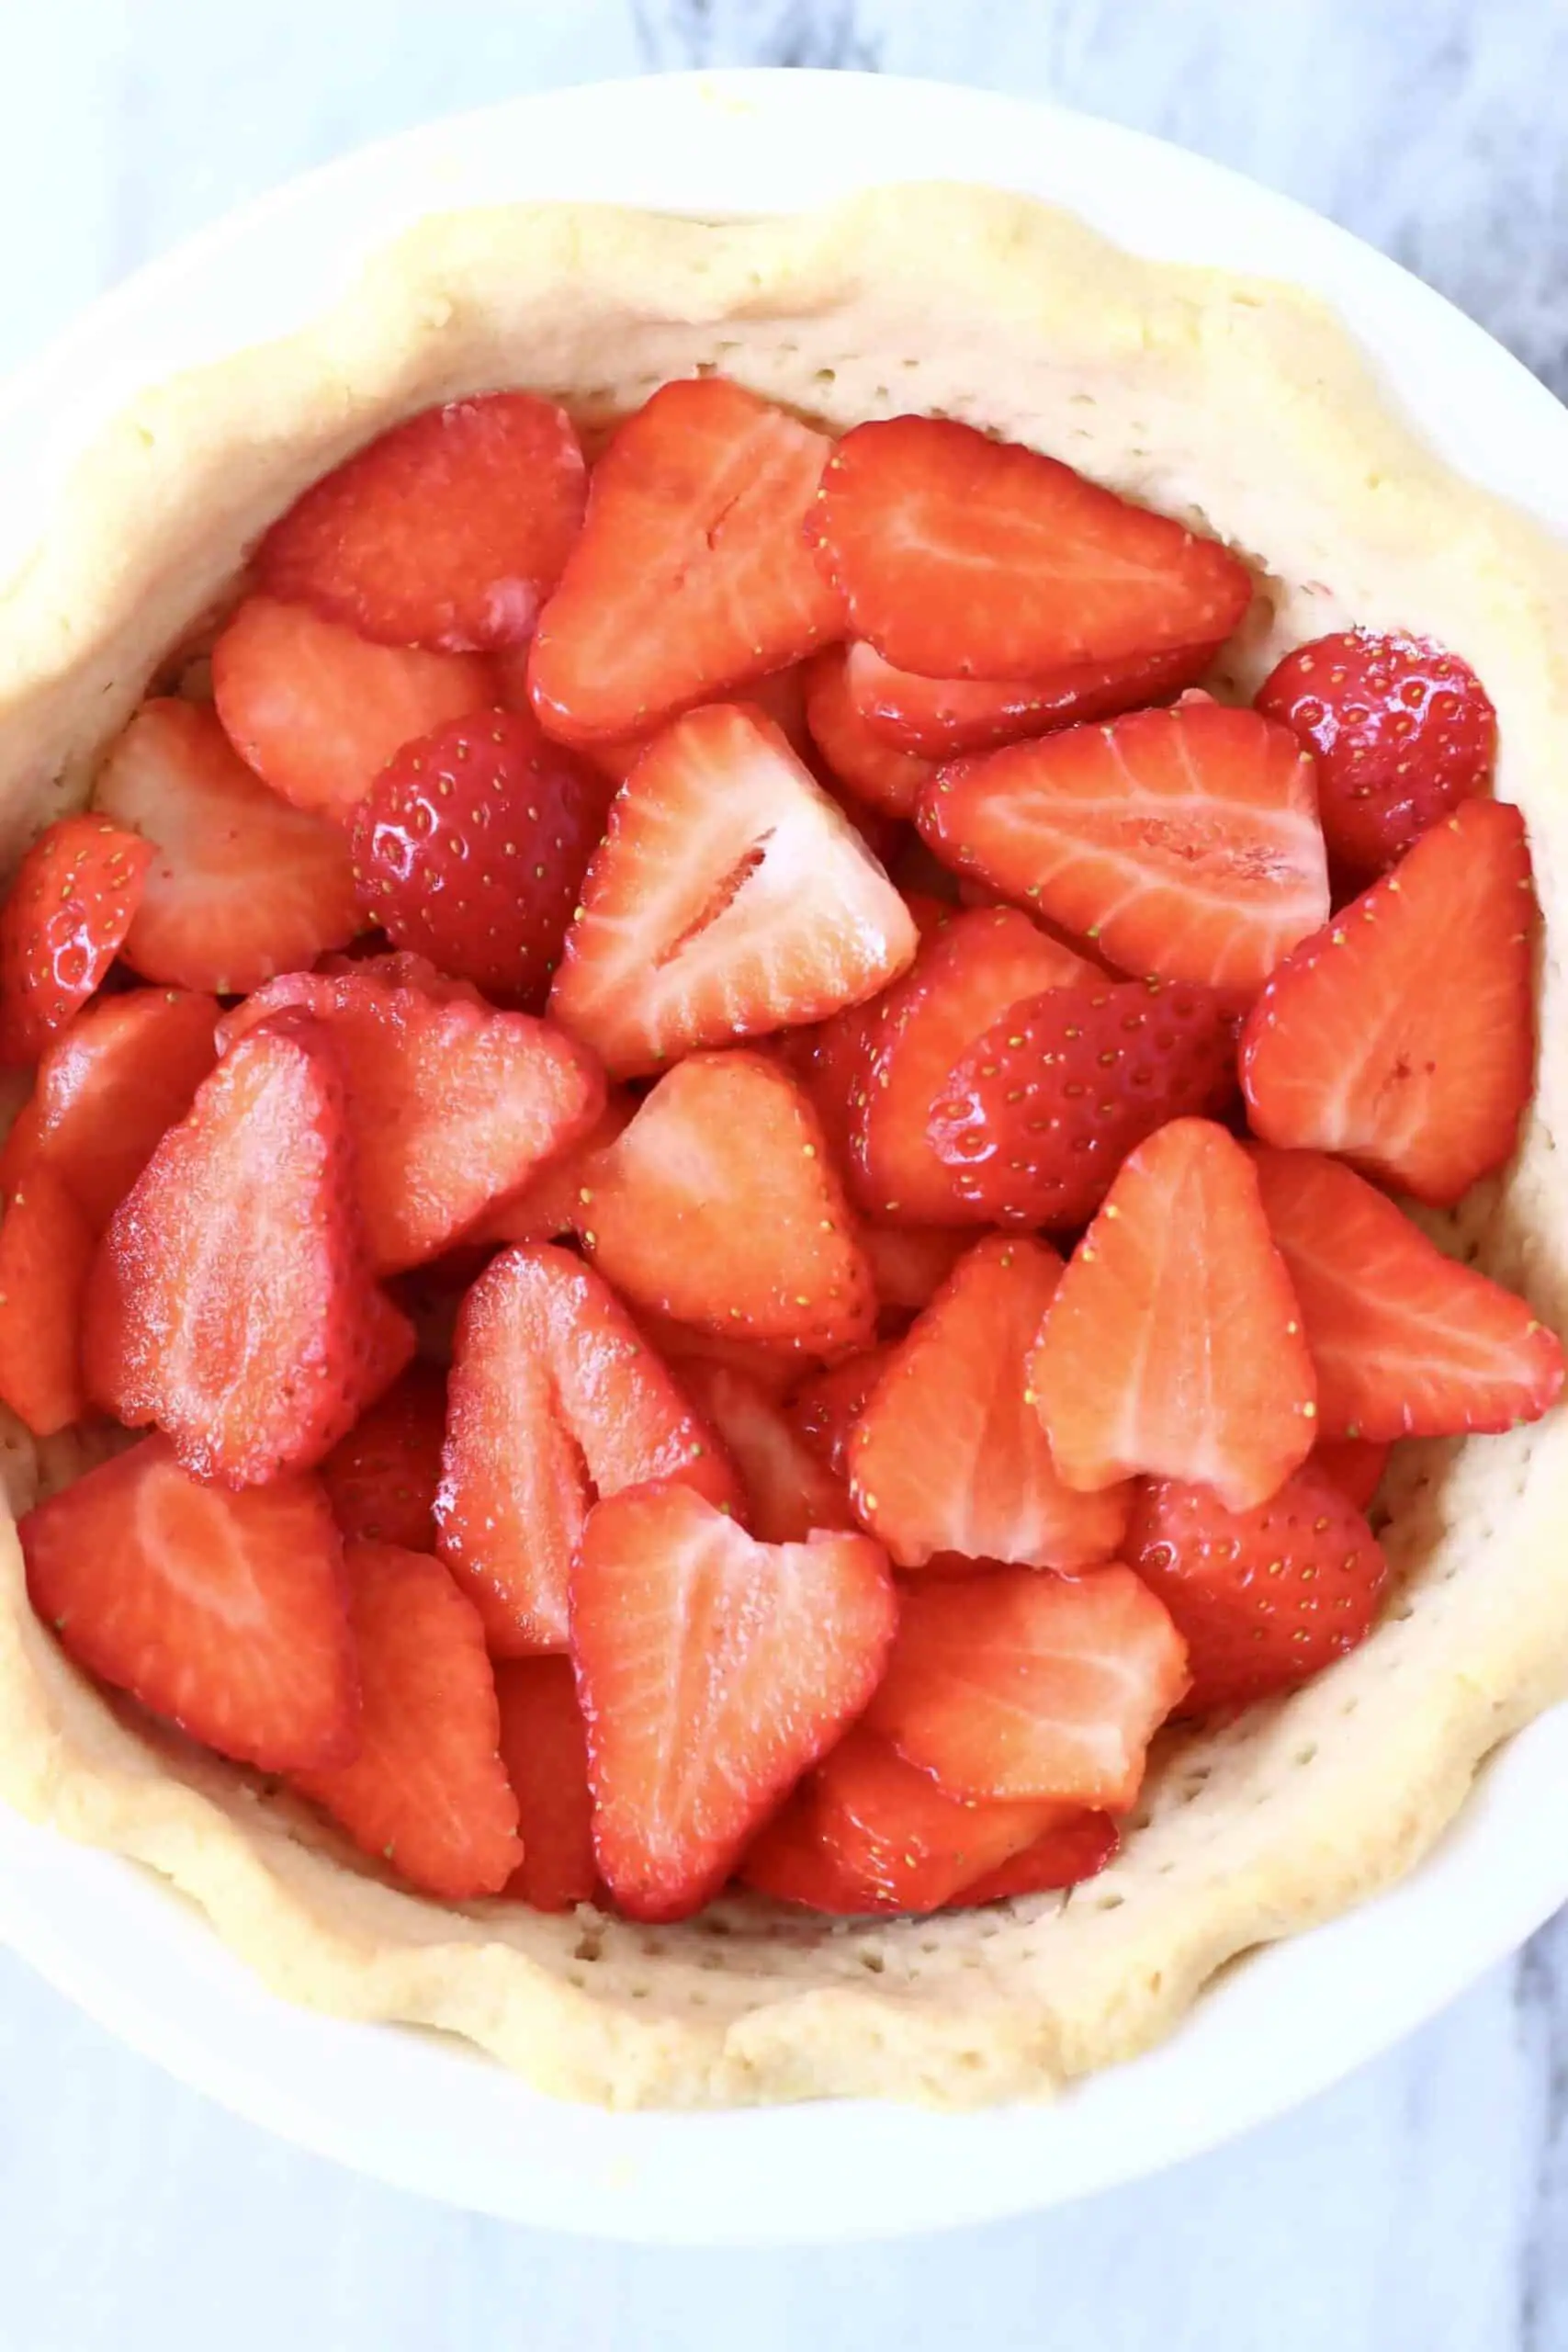 Photo of a pie crust filled with sliced strawberries in a white pie dish against a marble background